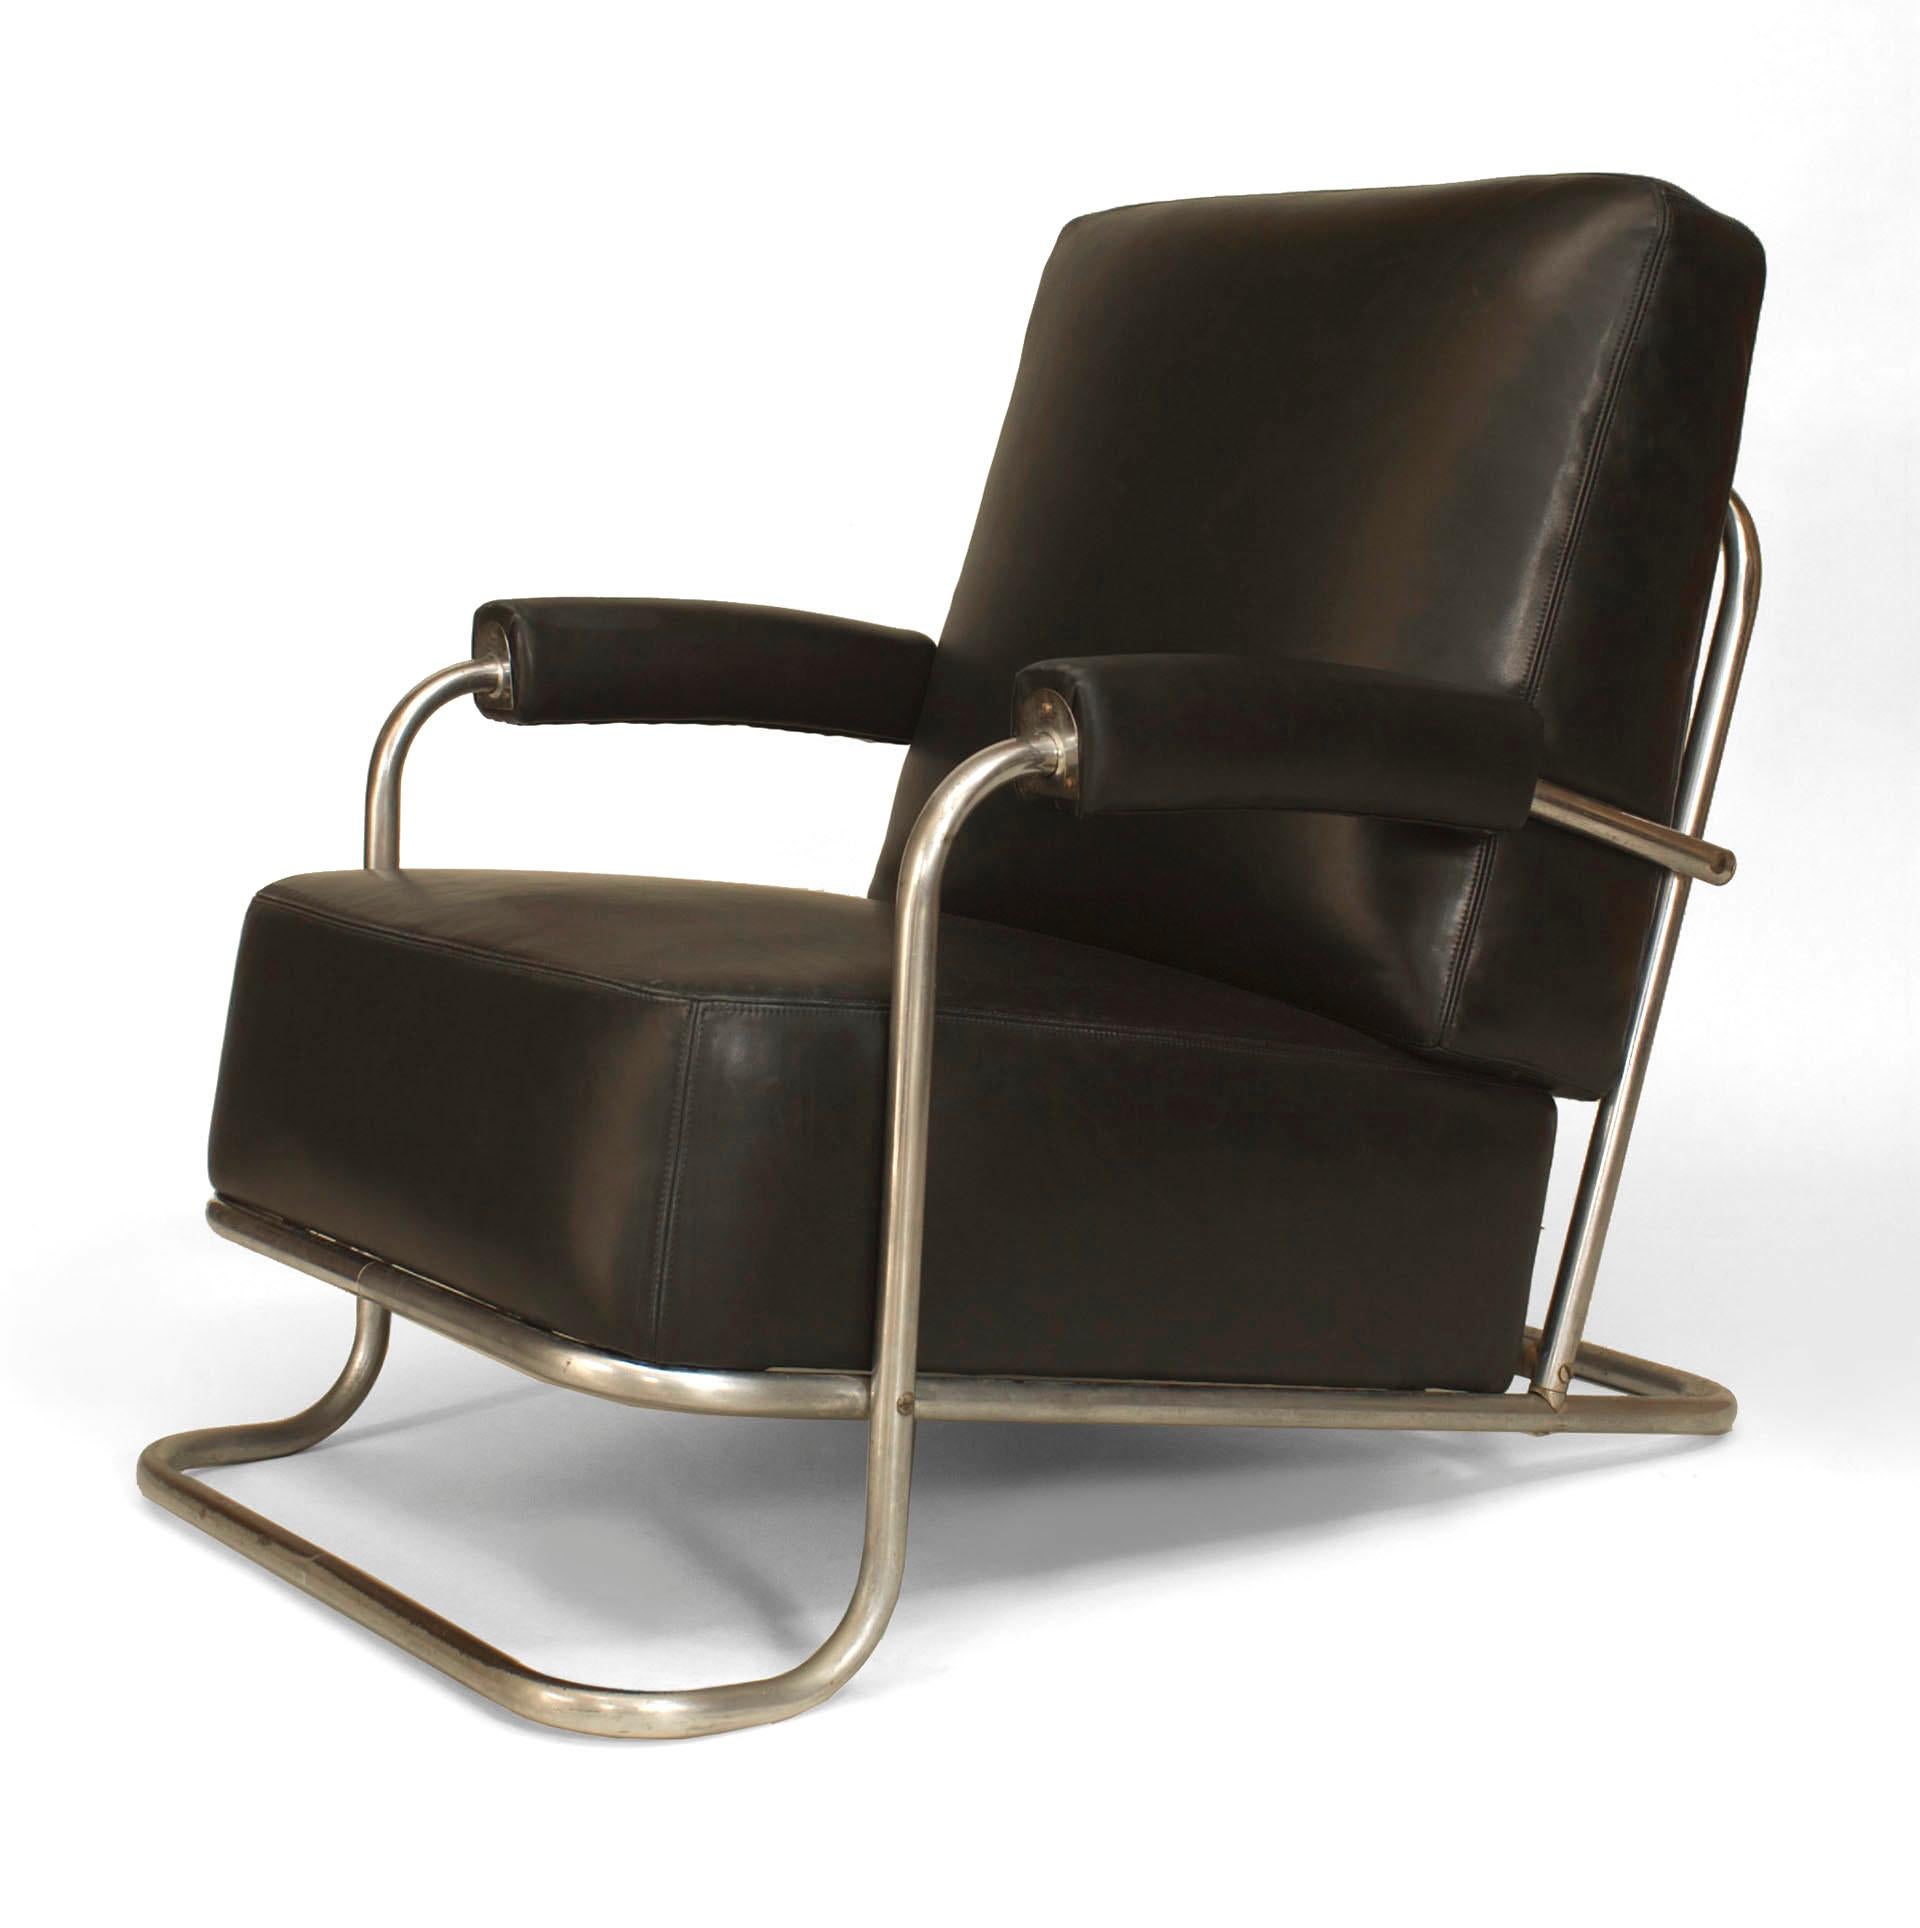 French Art Deco tubular chrome arm chair with black leather upholstered seat and back cushion (designed by R.C. COQUERY for THONET, Model #B 256 lounge chair, 1929).
 